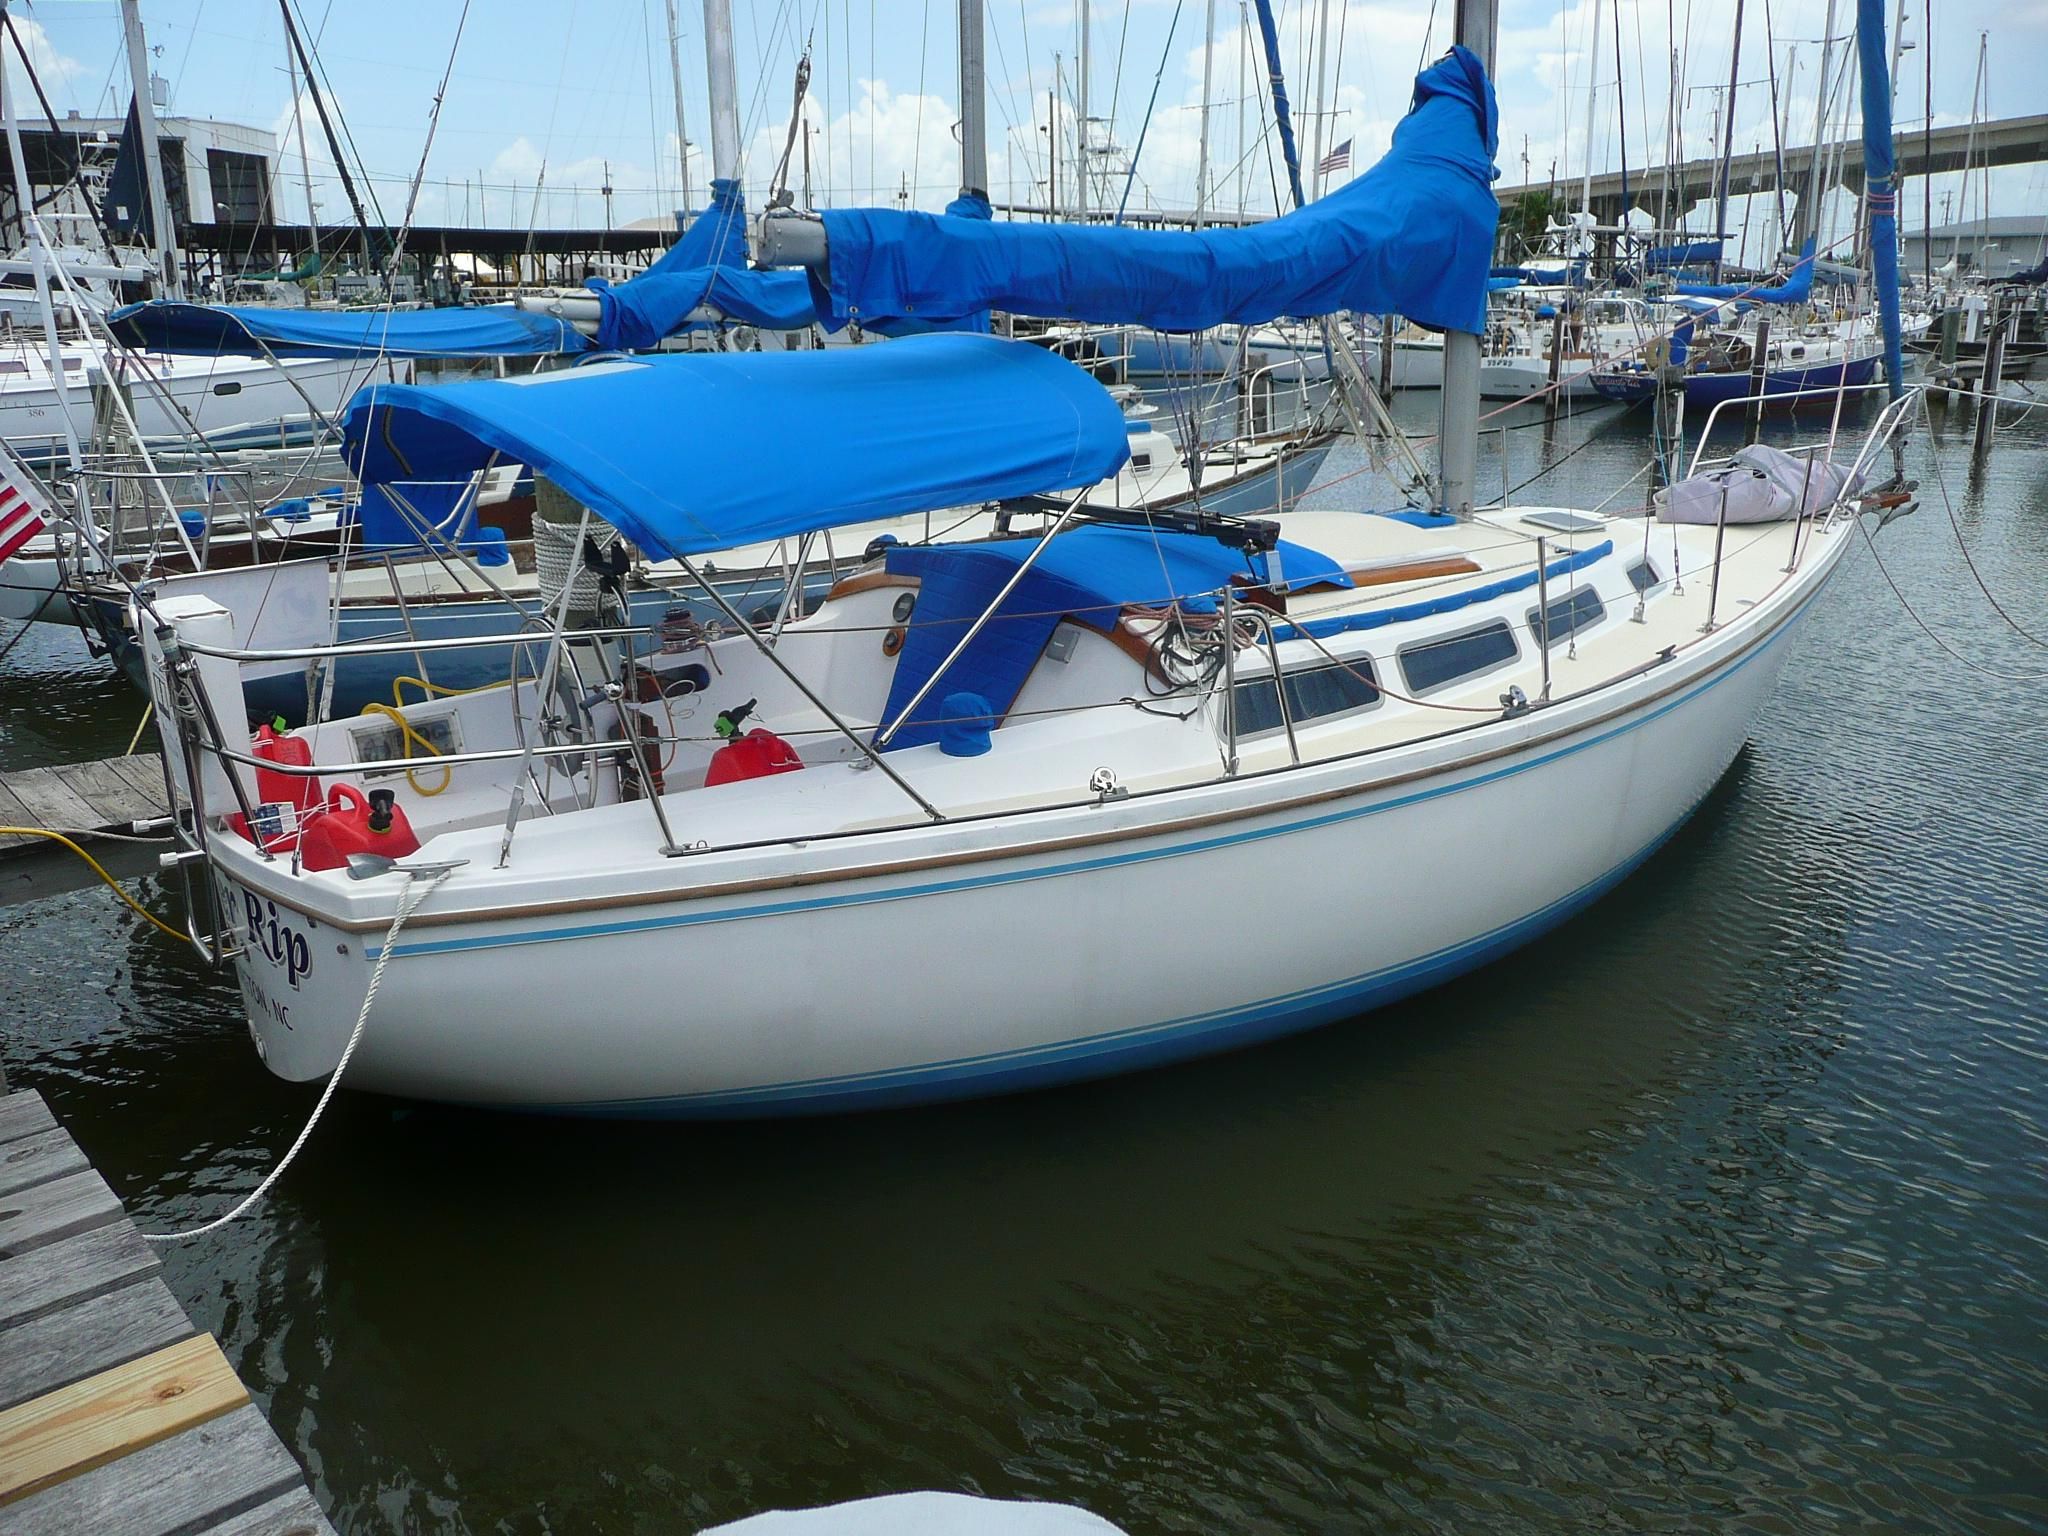 30 foot sailboat for sale